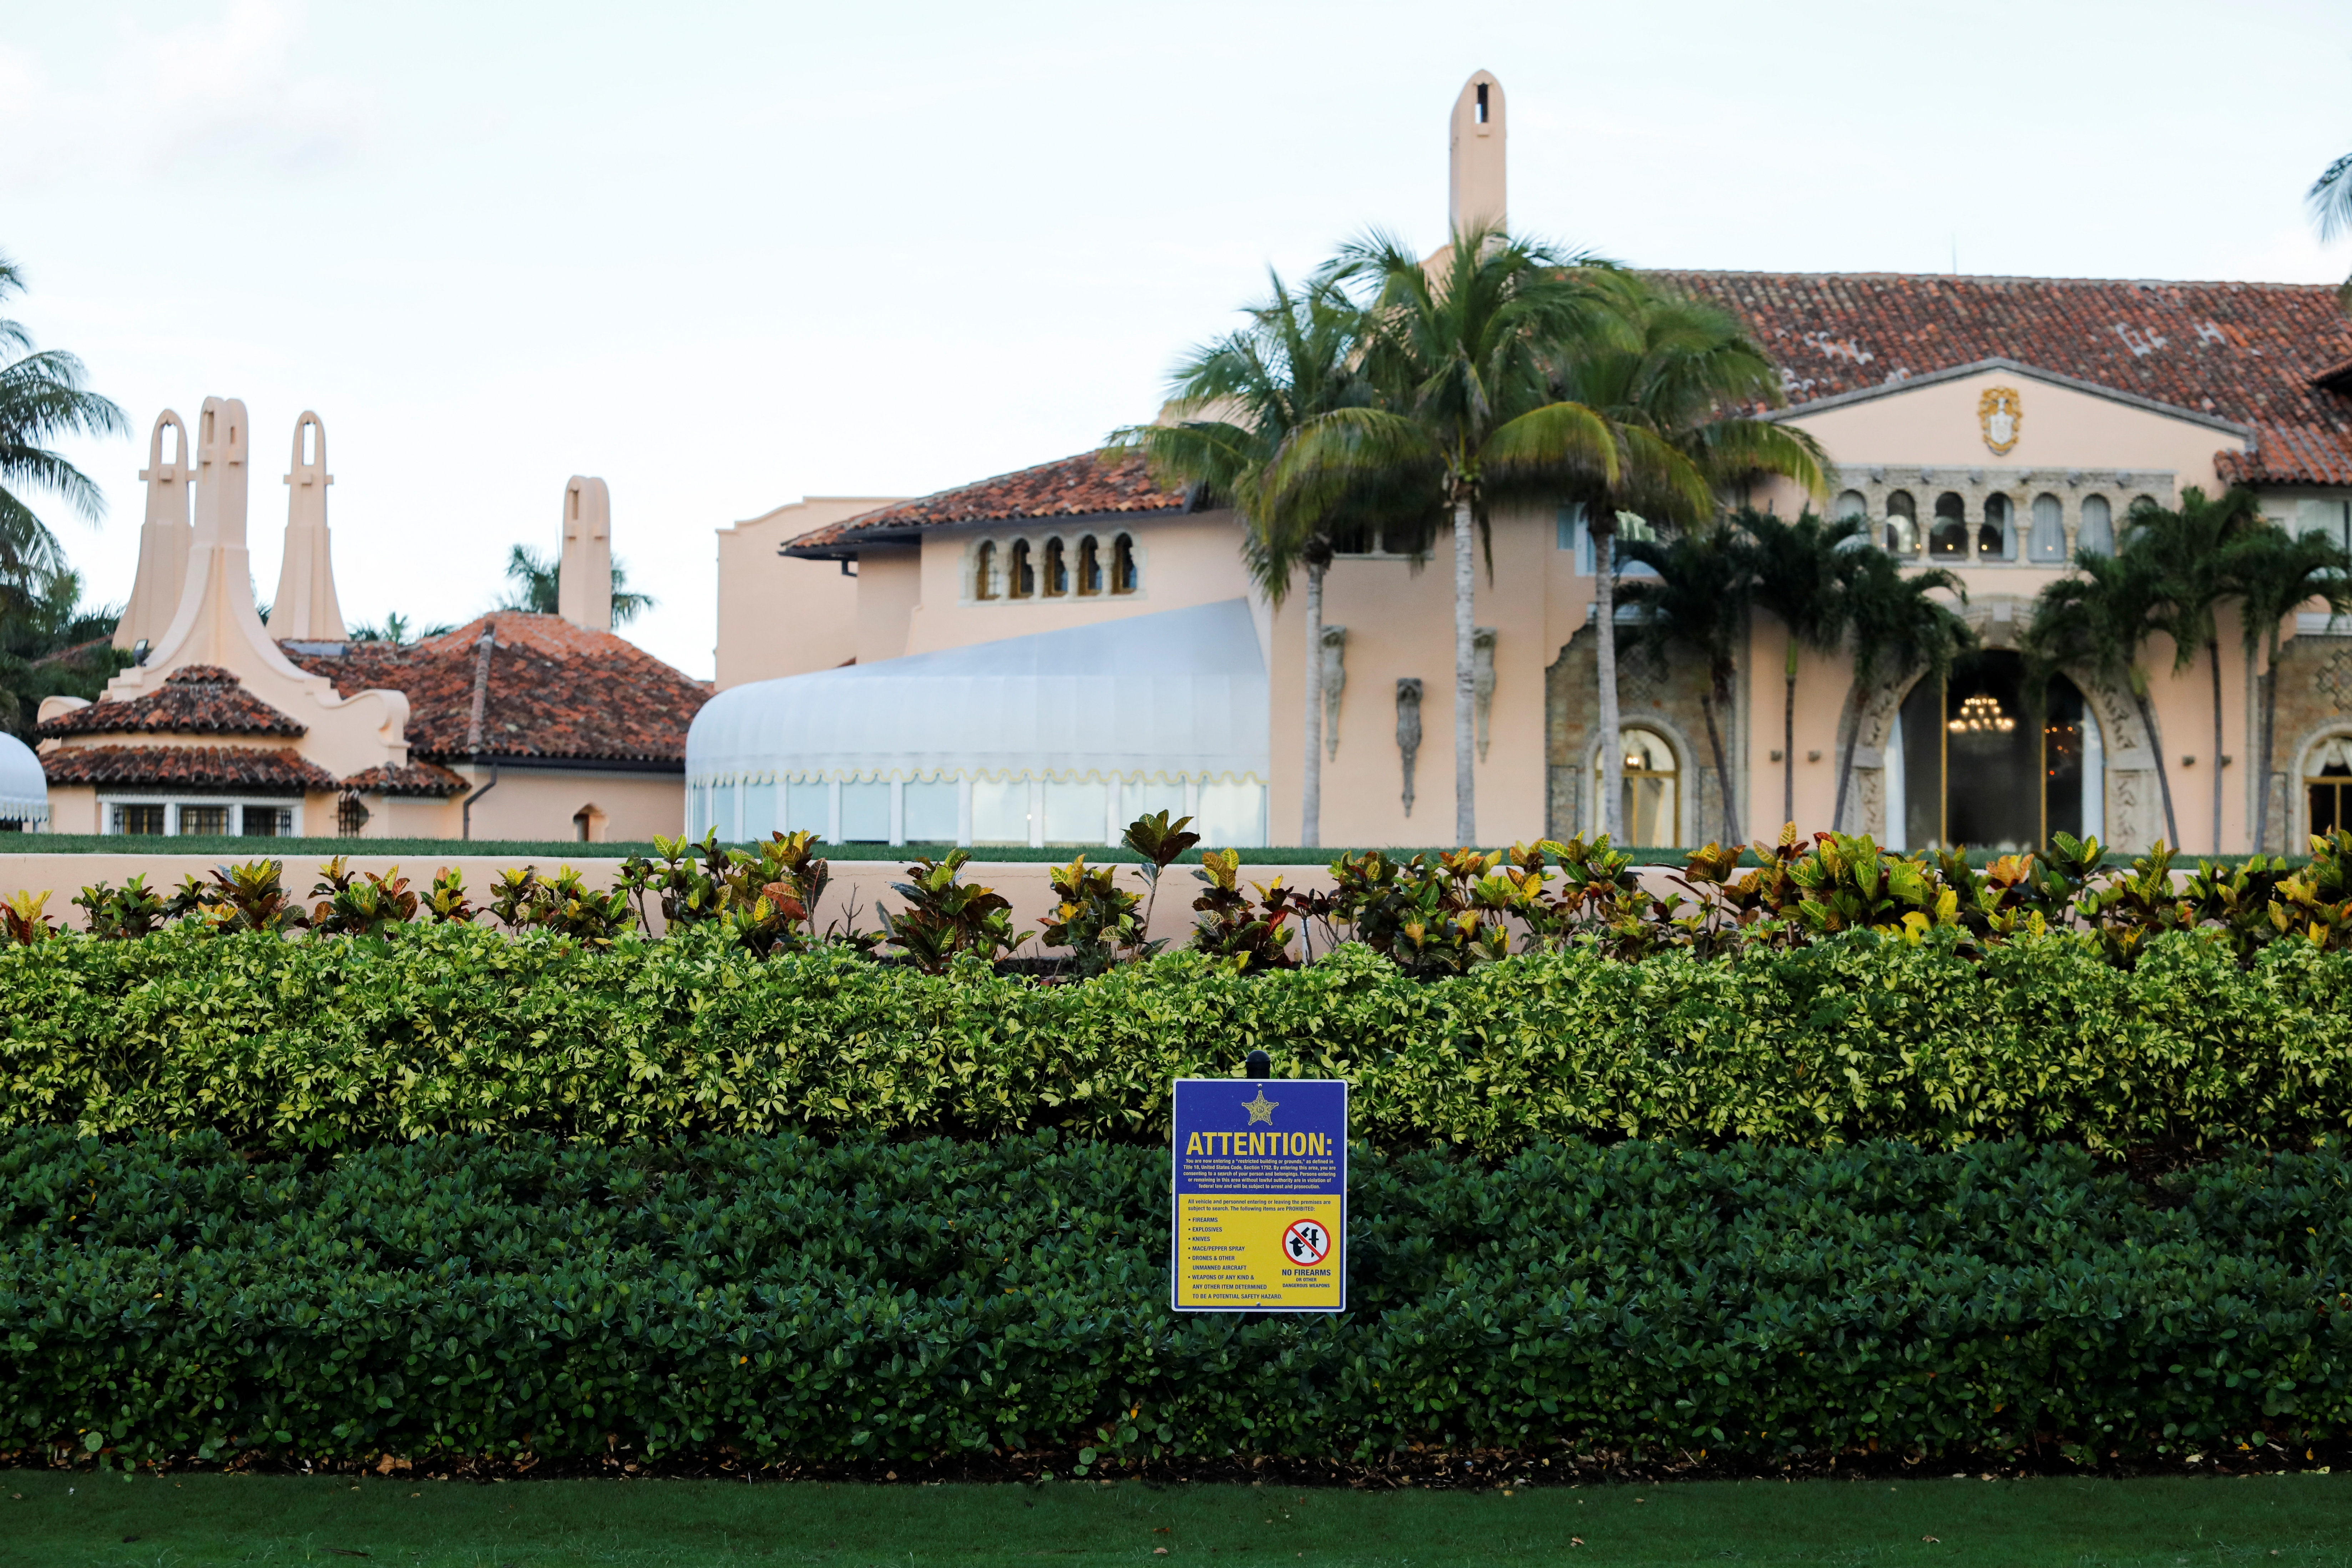 A Secret Service notification sign is seen in front of former U.S. President Donald Trump's Mar-a-Lago resort in Palm Beach